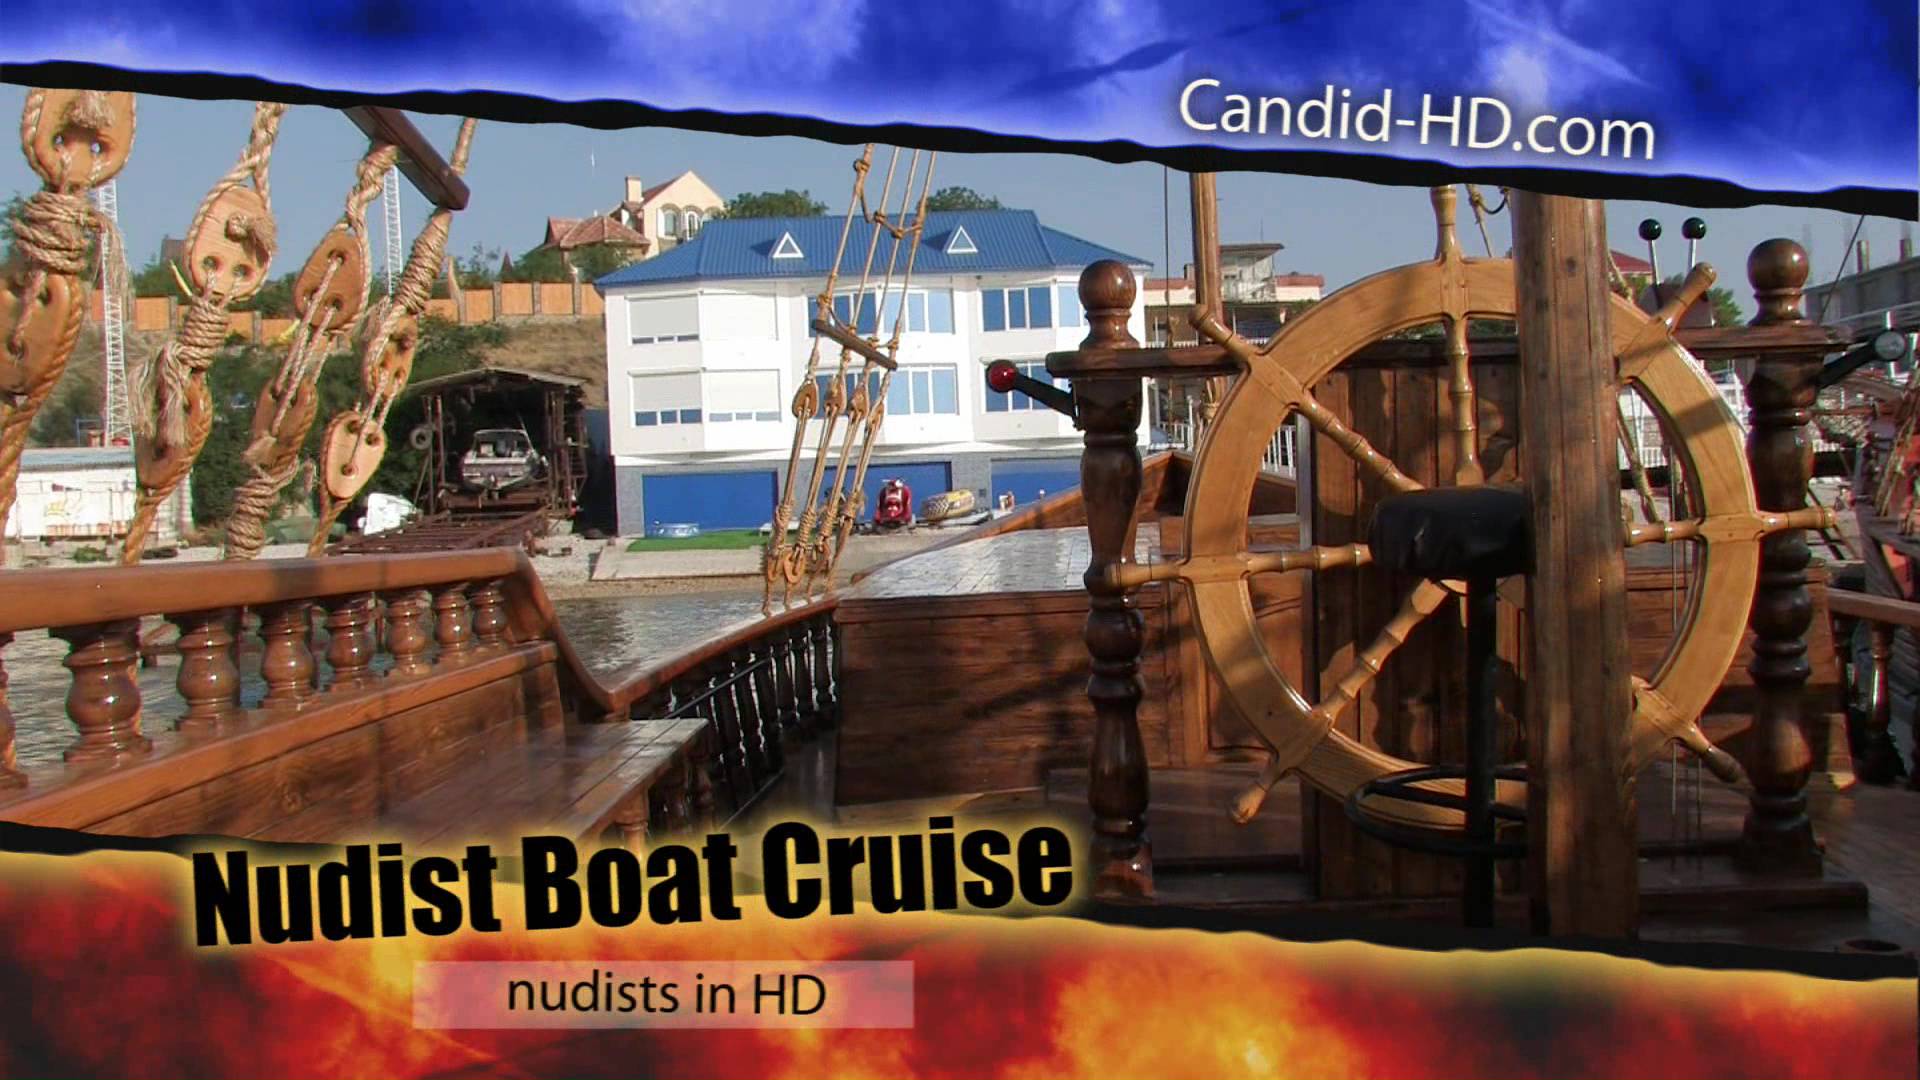 Candid-HD Videos Nudist Boat Cruise - Poster